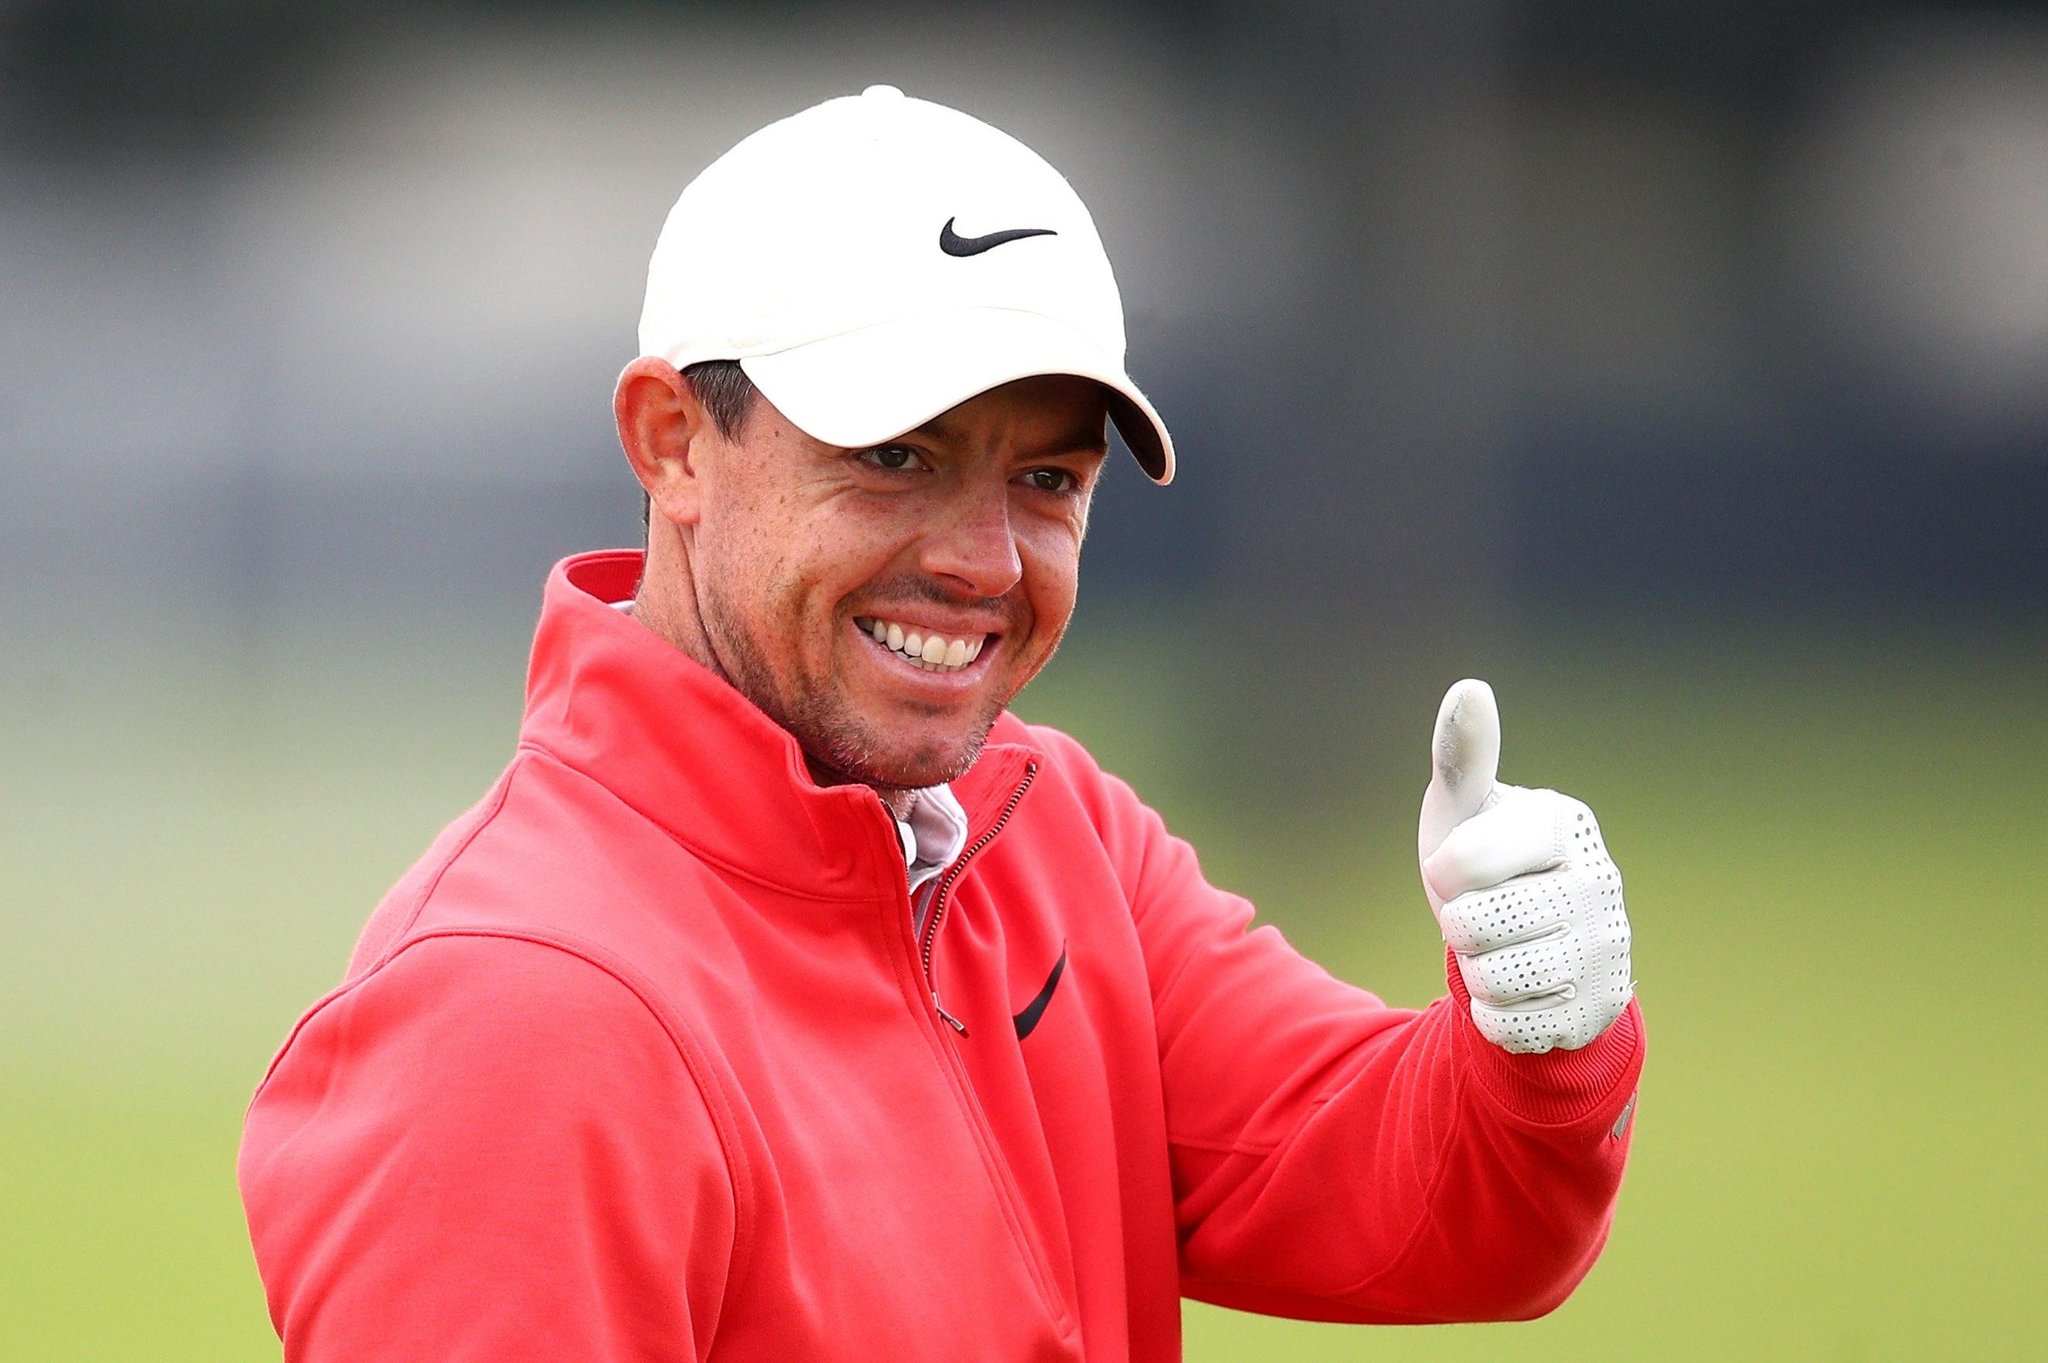 Rory McIlroy to draw on memories of best golf to defend Wells Fargo Championship